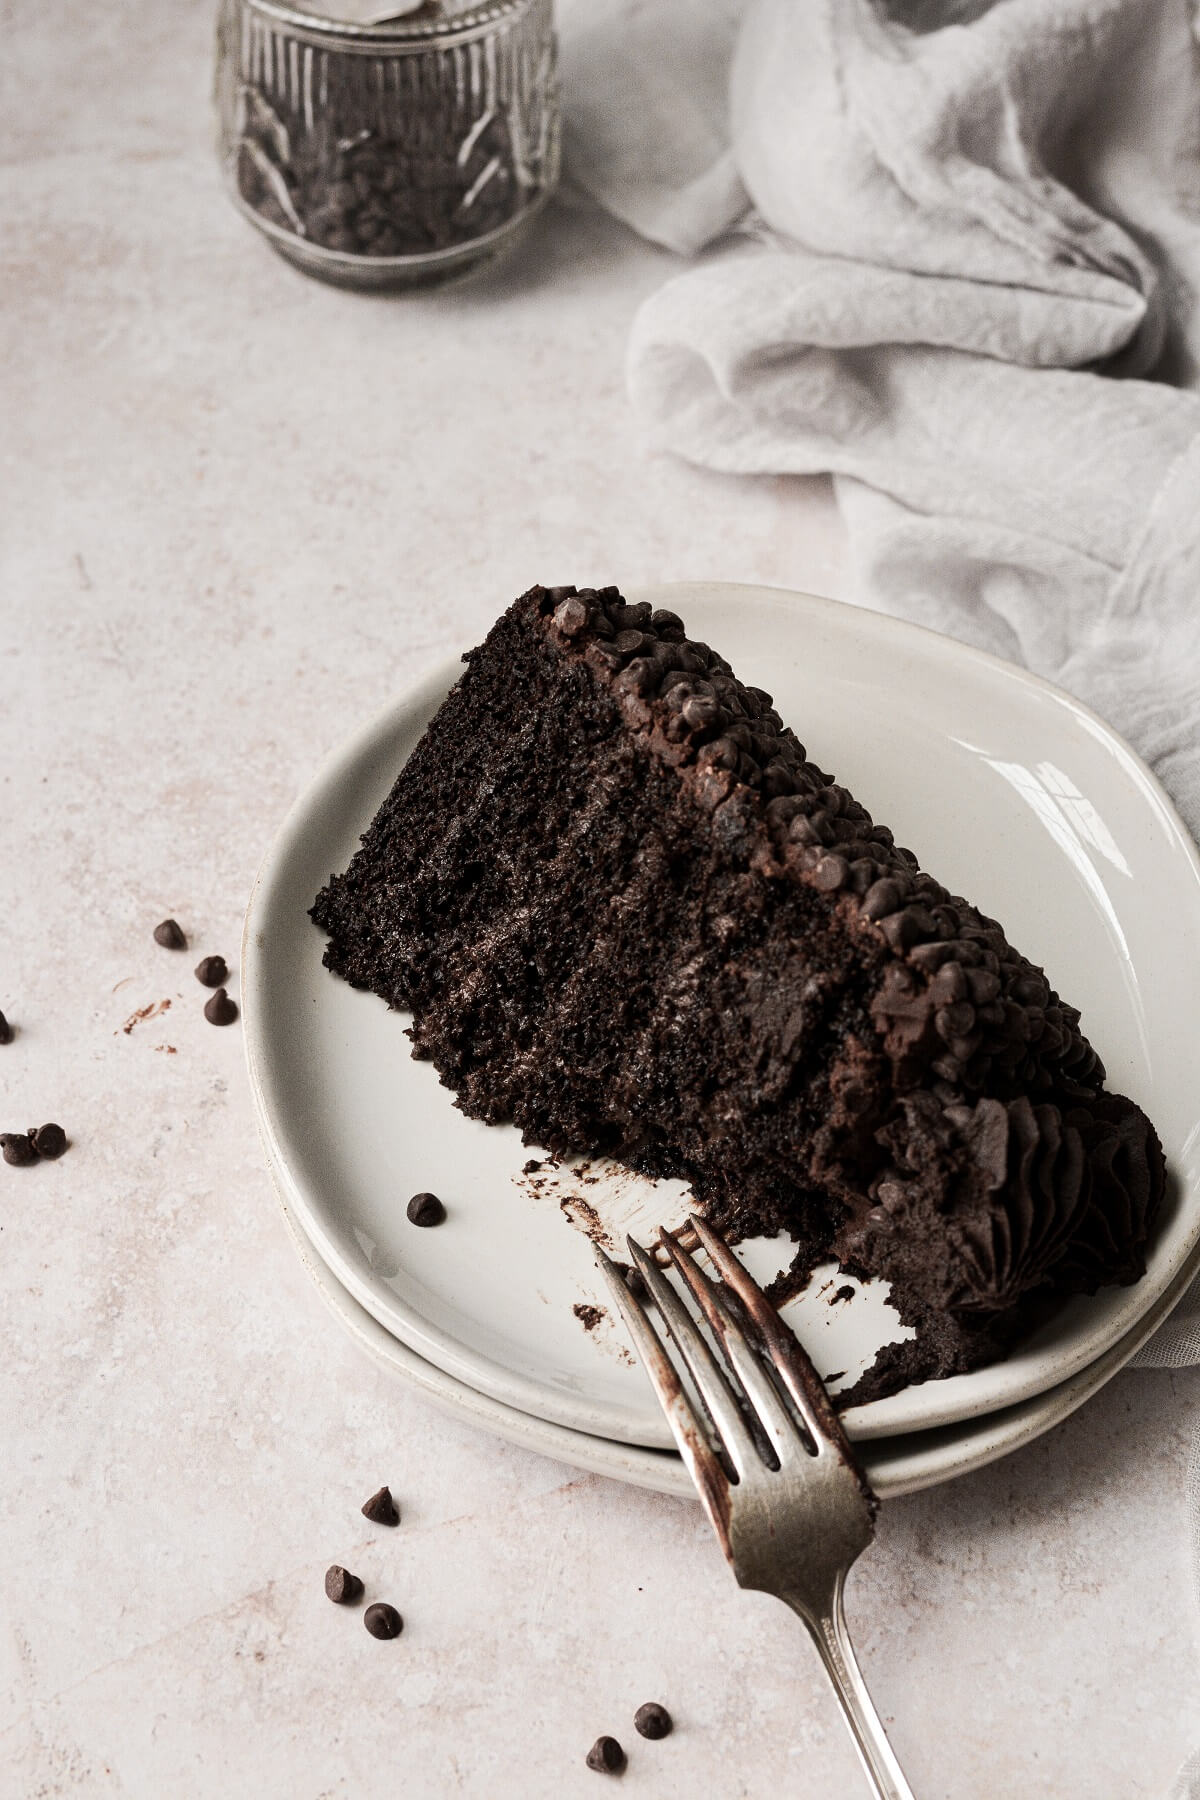 A slice of chocolate truffle cake with a bite taken.